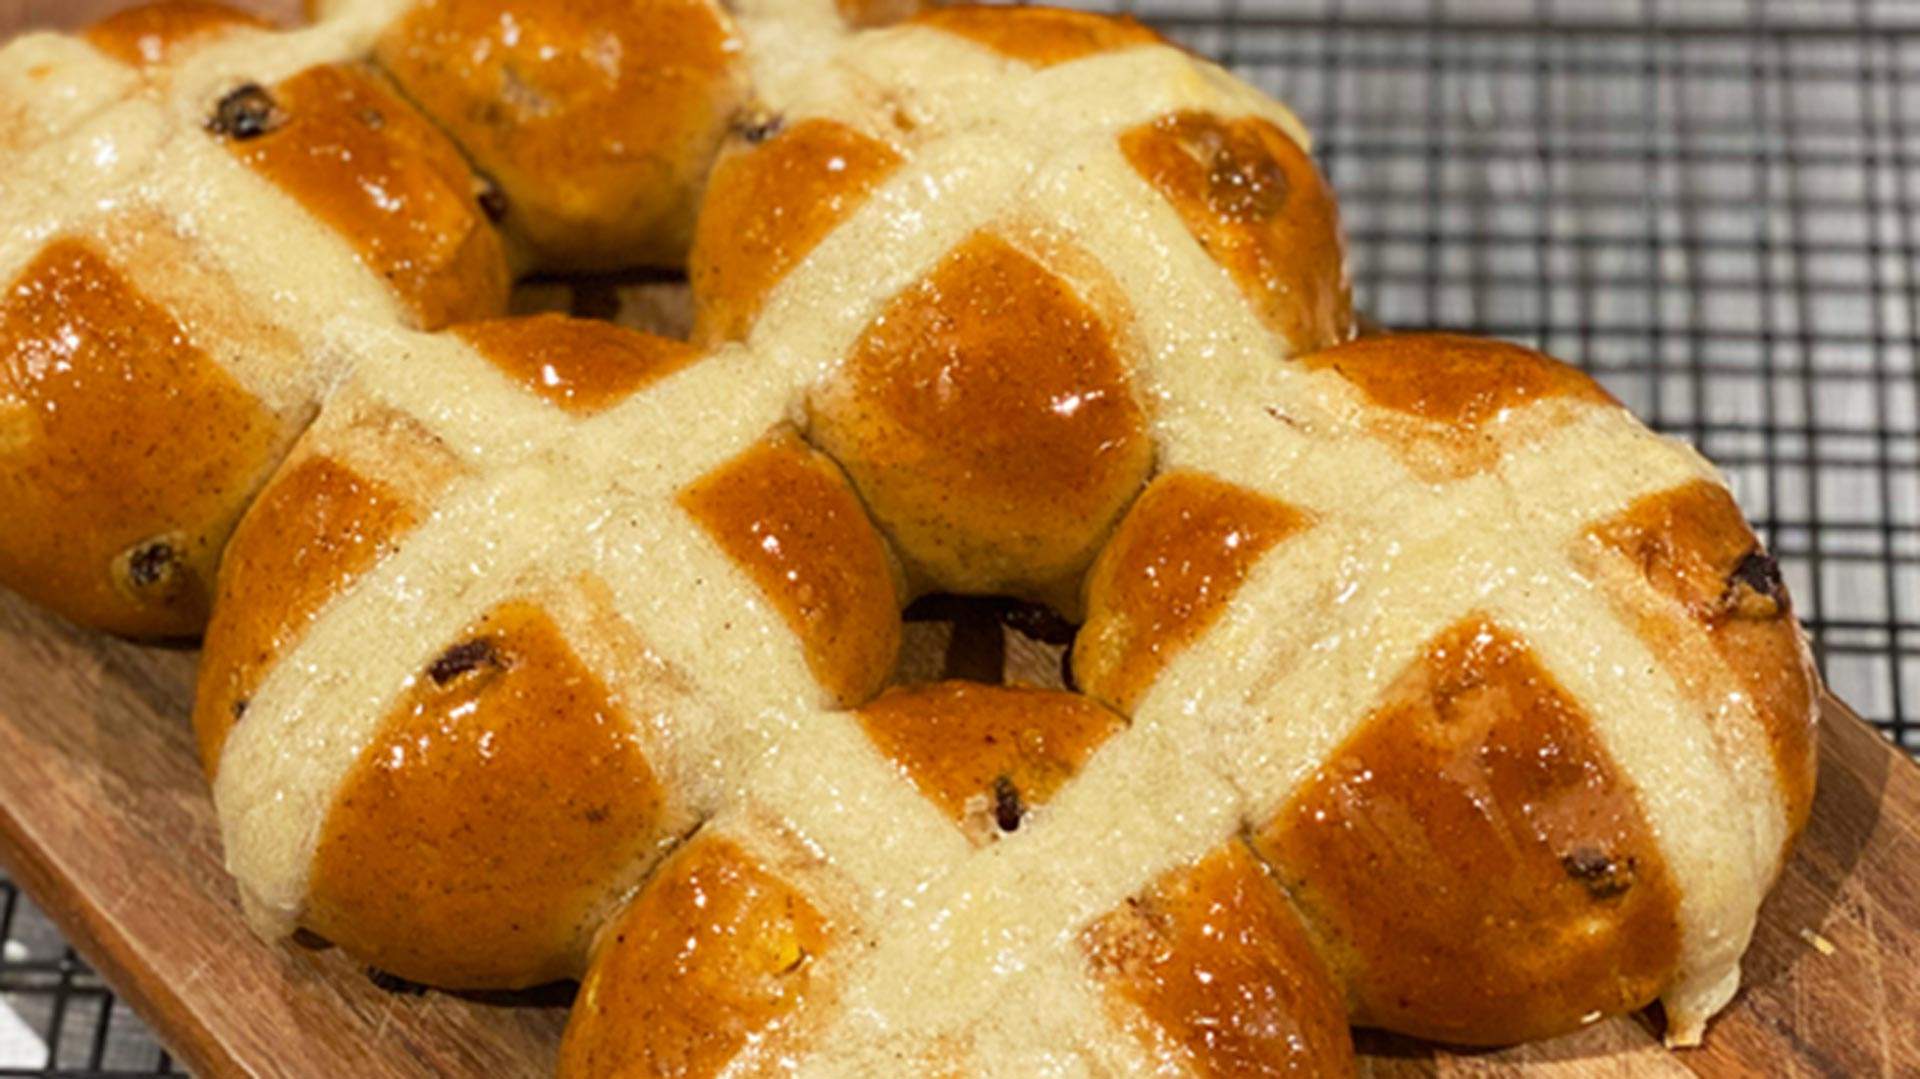 Much-Loved Dessert Spot Glacé Is Selling Hot Cross Bun Kits for You to Bake at Home This Easter